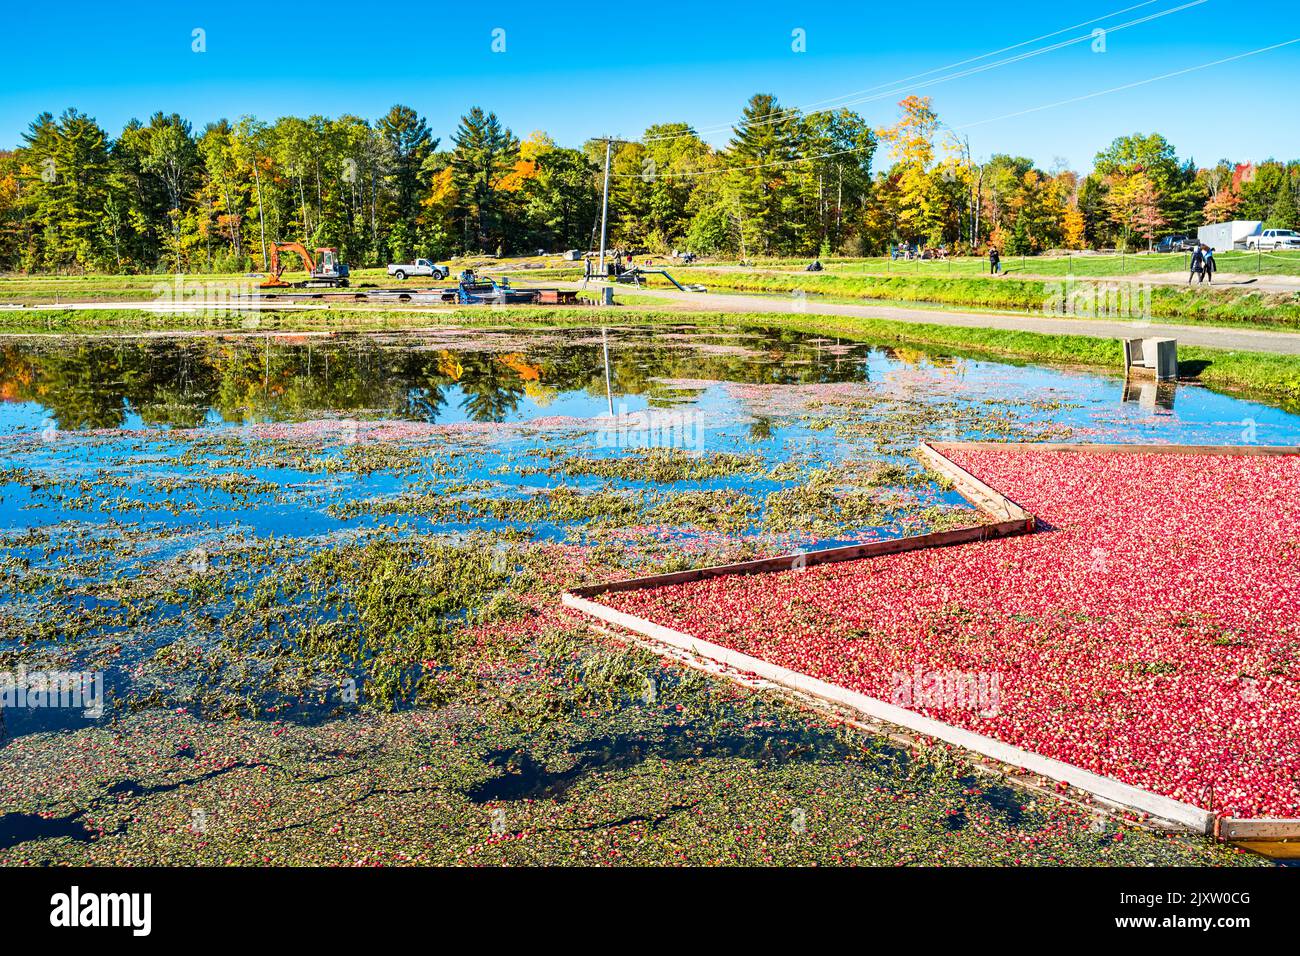 Cranberry harvest at a cranberry bog in Ontario, Canada Stock Photo